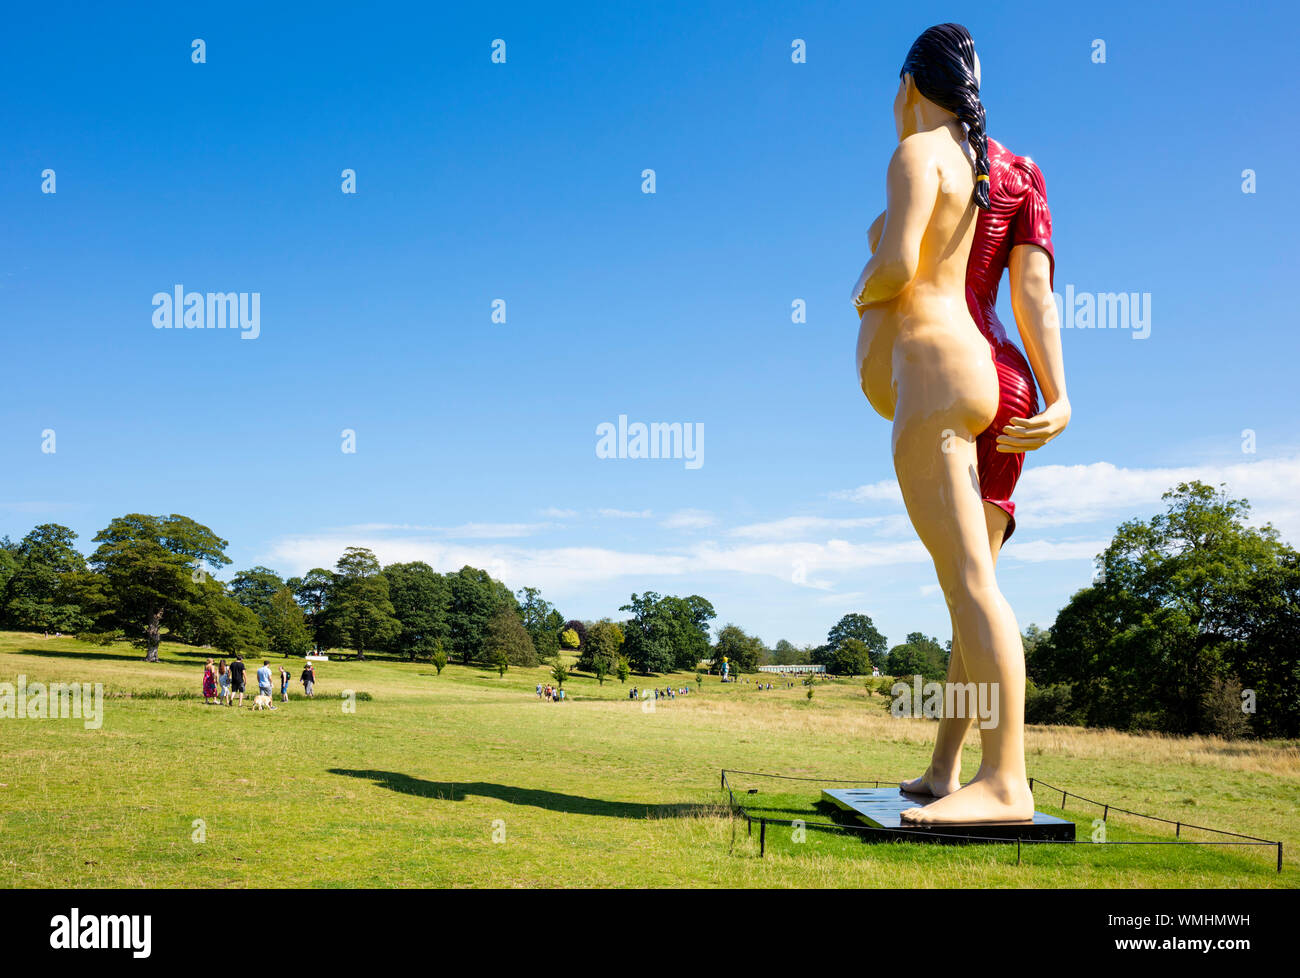 Sculpture of the Virgin Woman by Damien Hirst at the Yorkshire sculpture park YSP Yorkshire England uk gb Europe Stock Photo